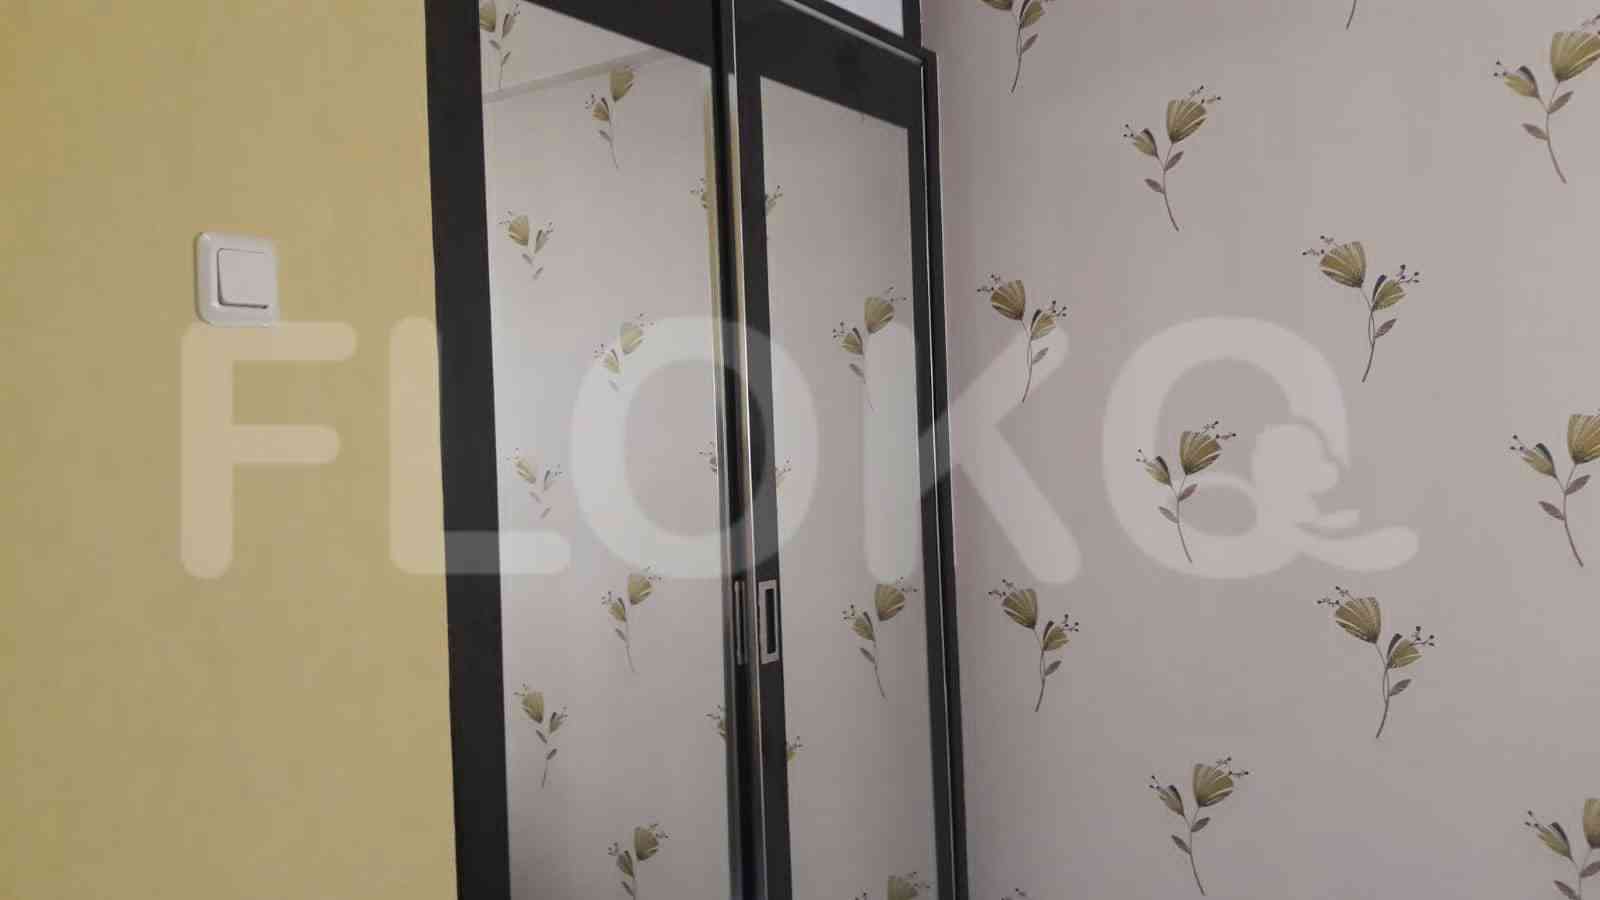 2 Bedroom on 18th Floor for Rent in Sentra Timur Residence - fca2d8 3